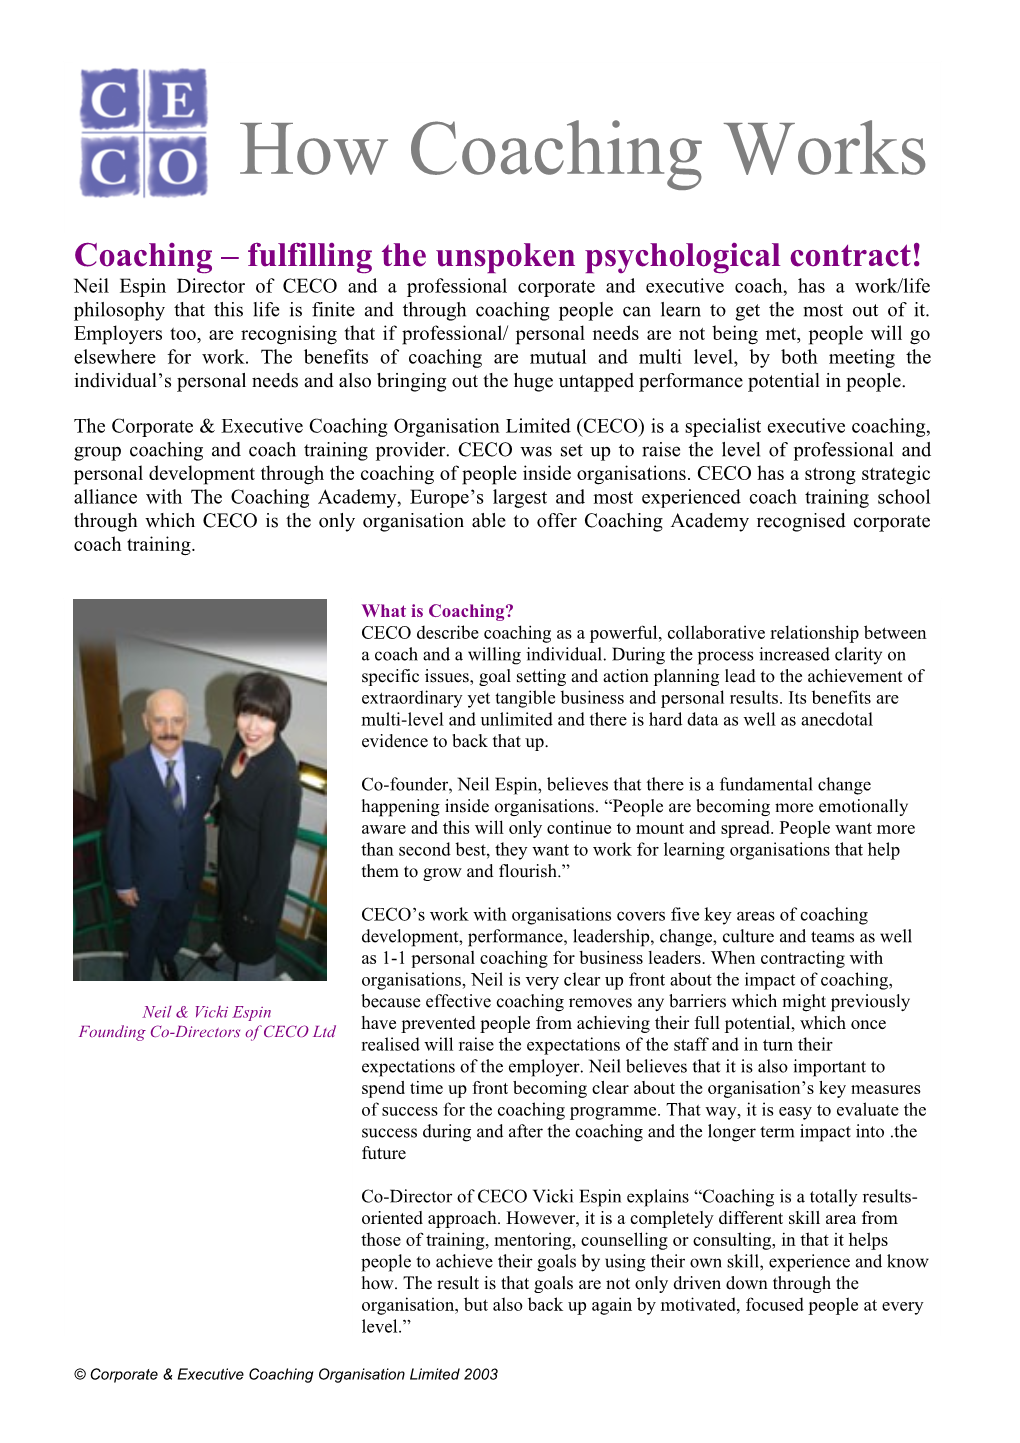 Coaching Fulfilling the Unspoken Psychological Contract!